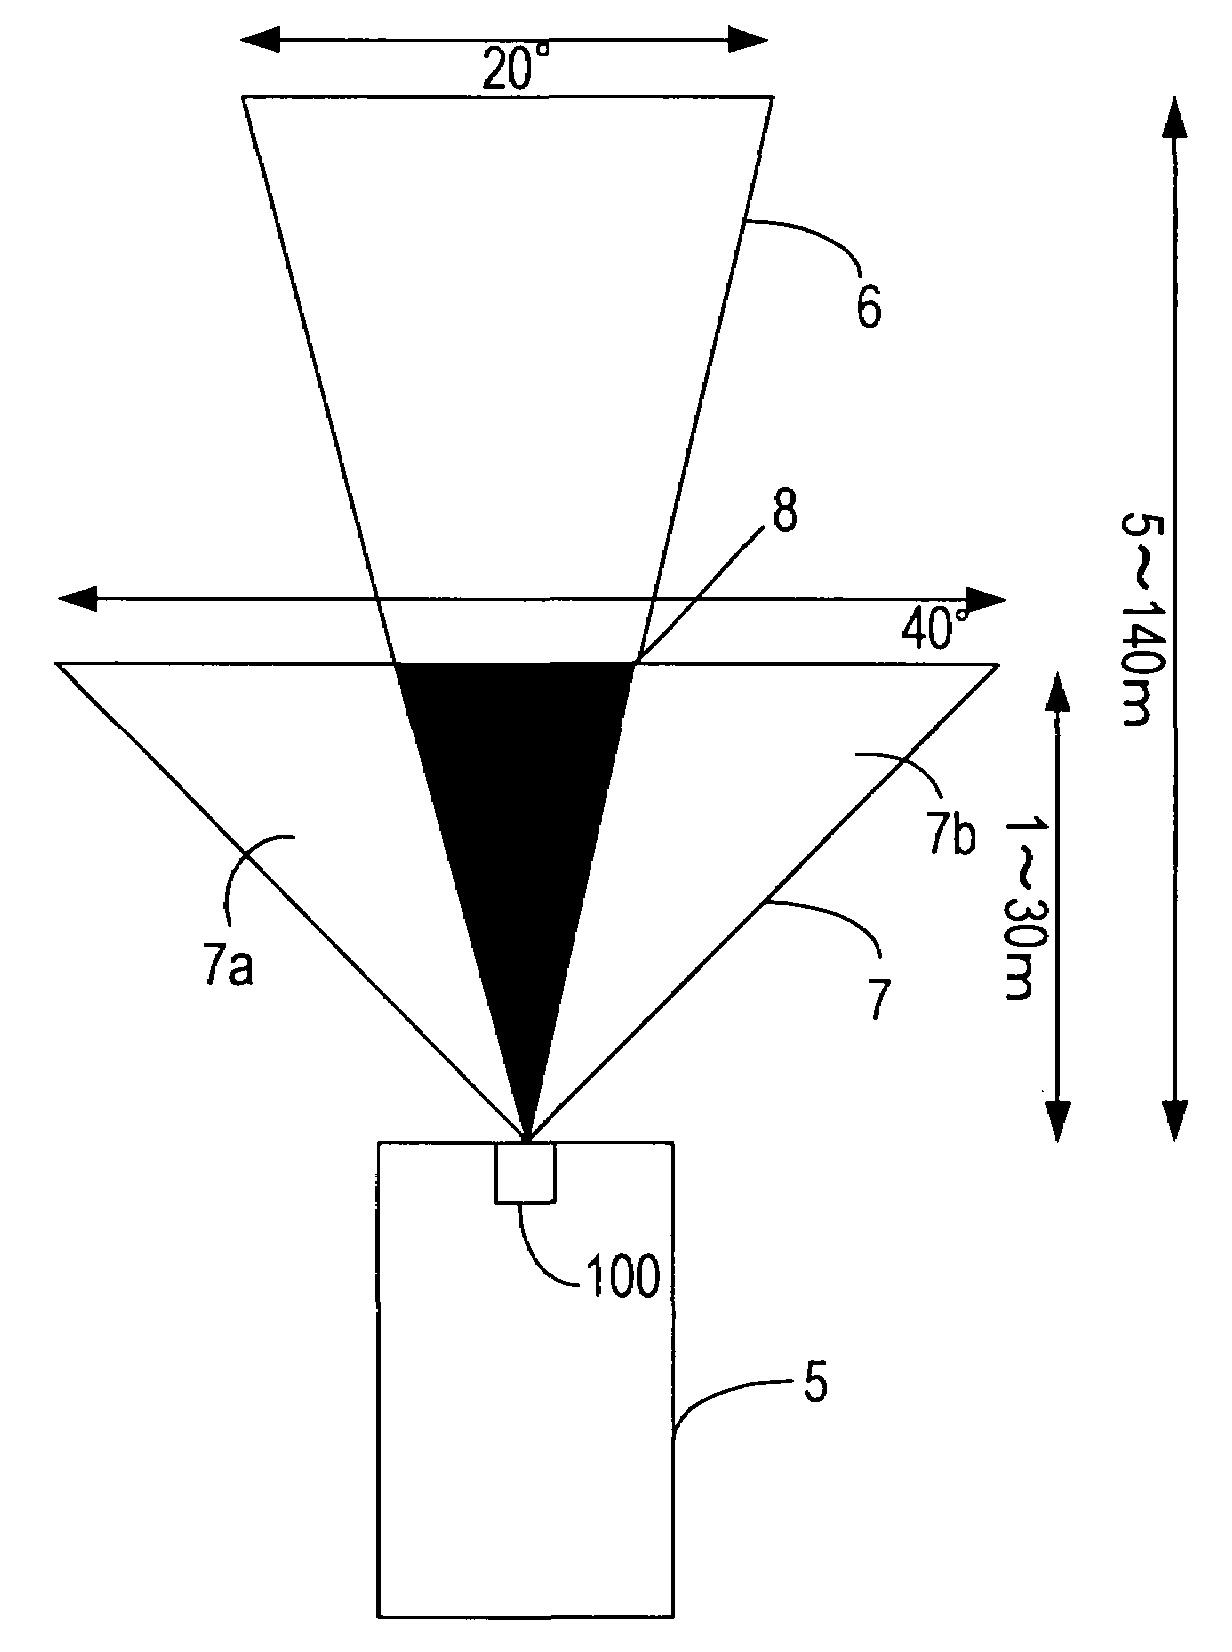 Radar device with overlapping short and long range sensors